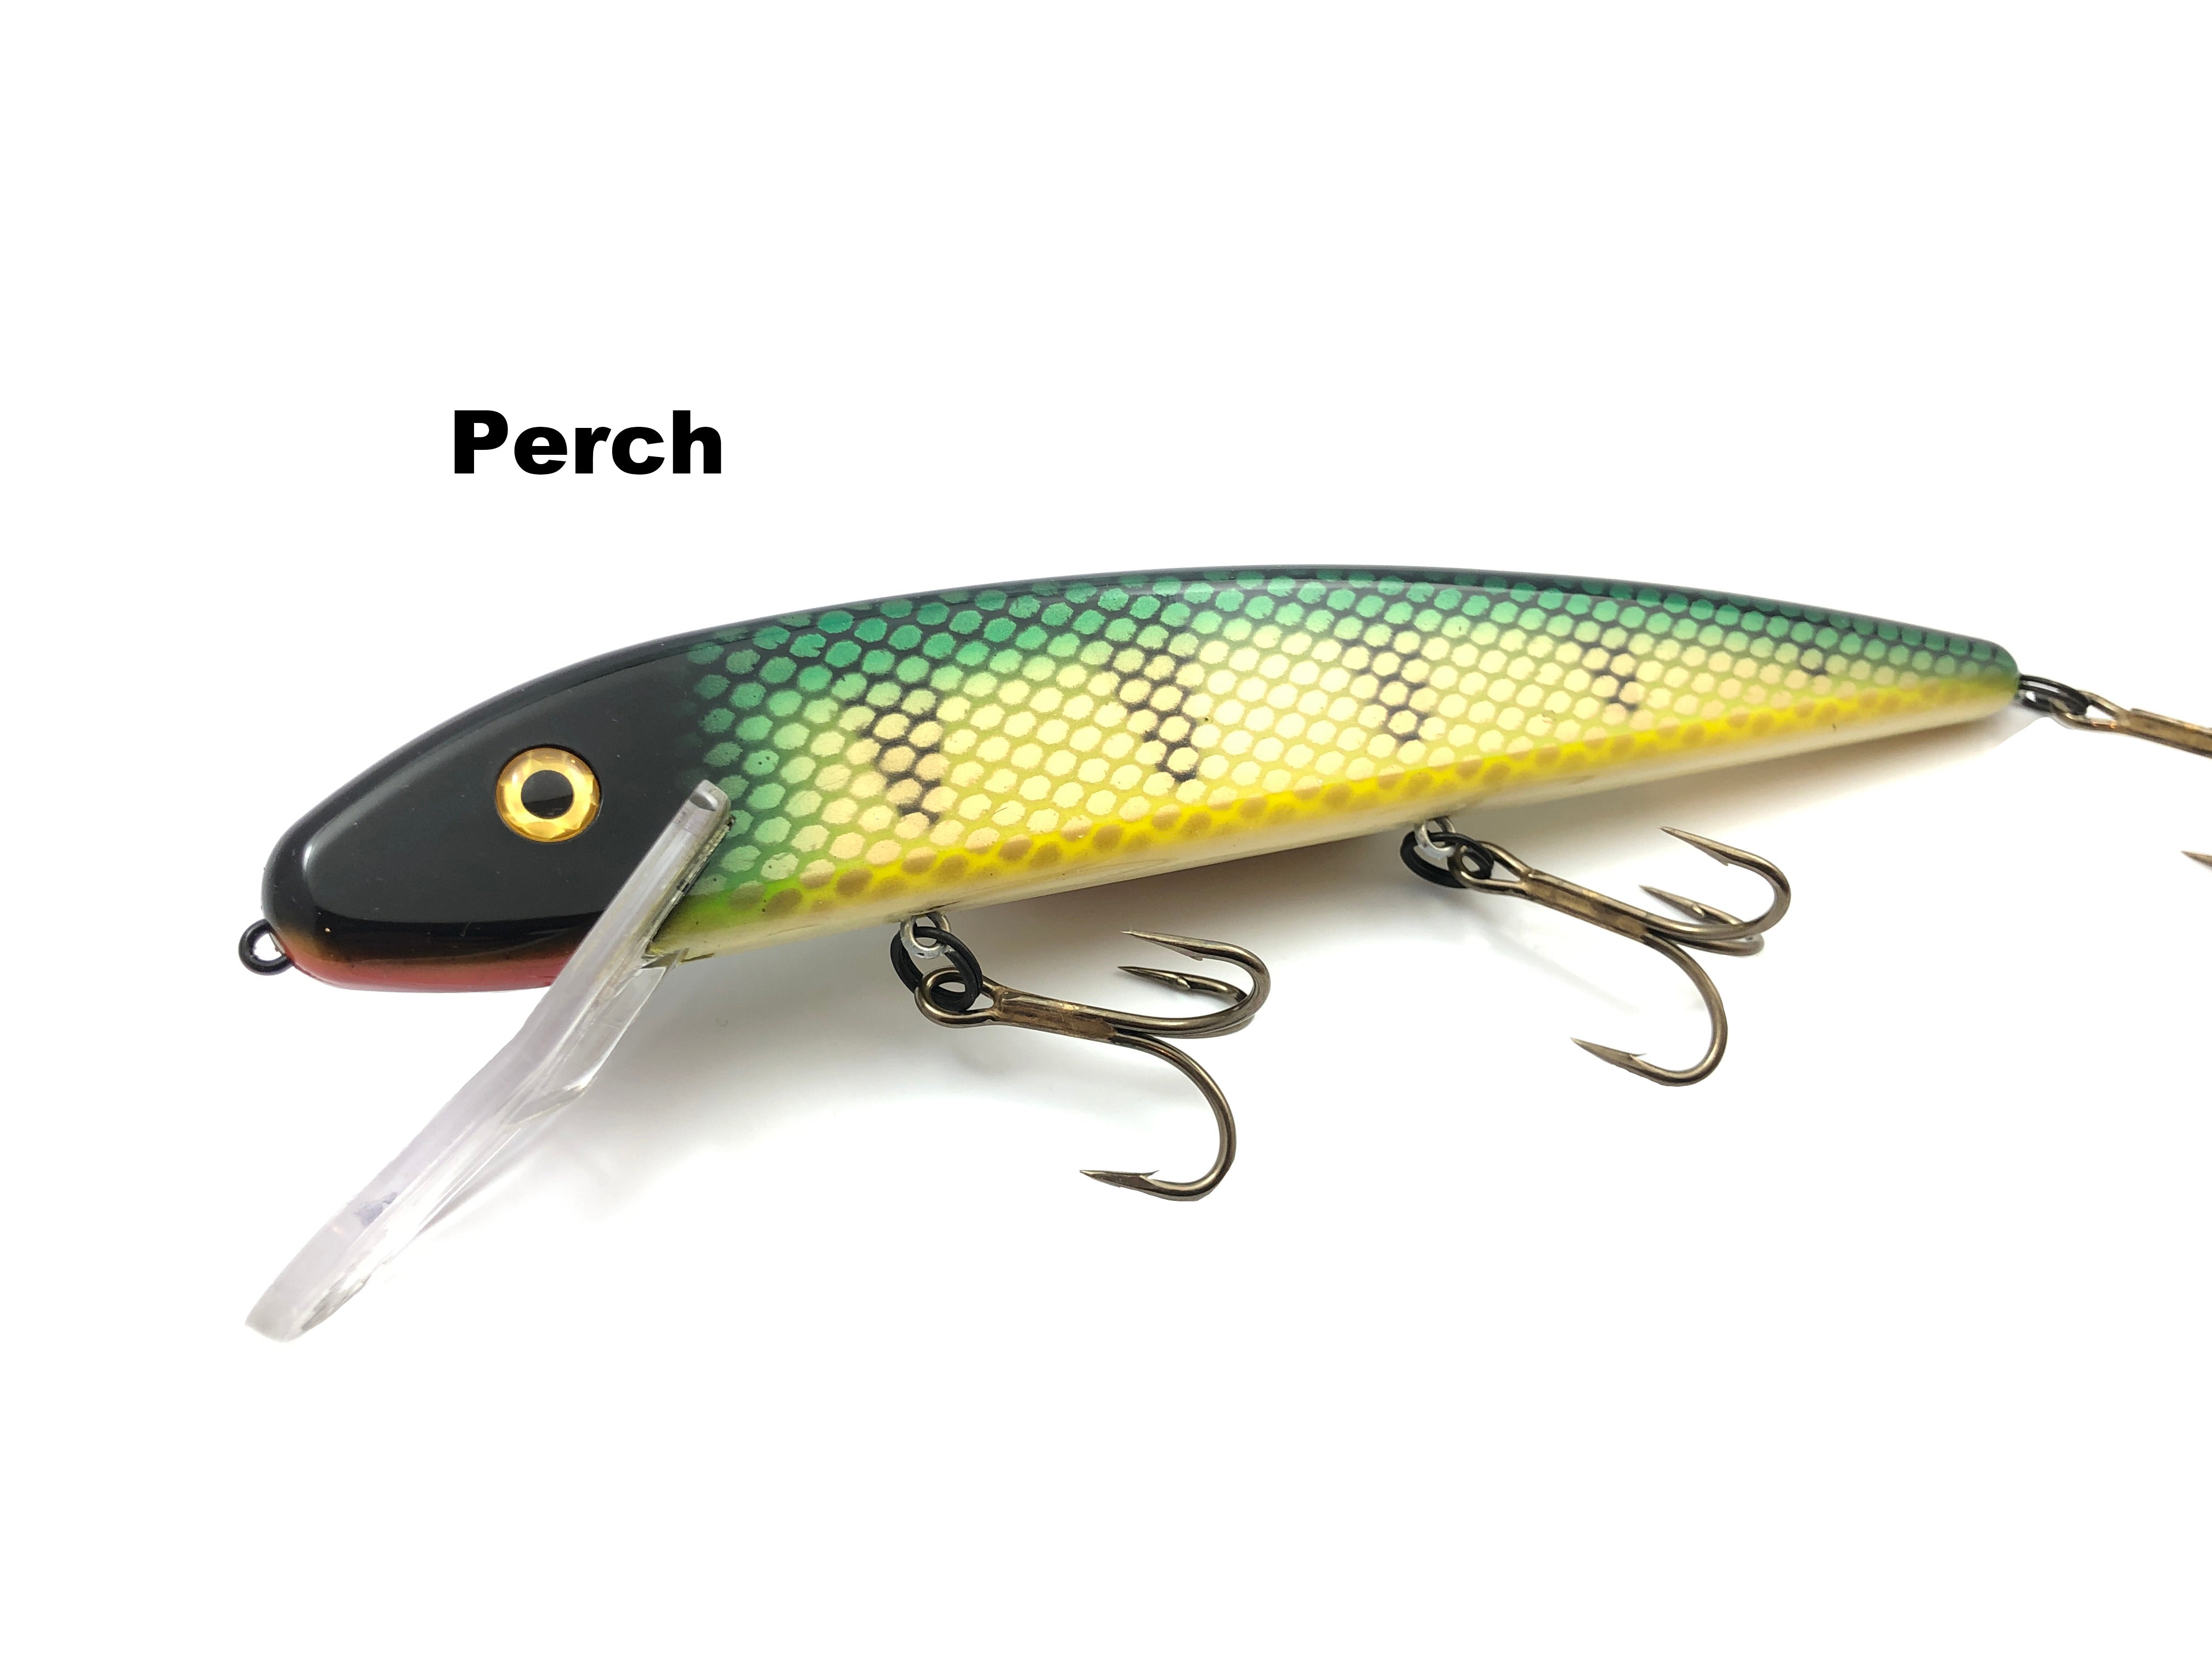 Dynamic Lures - 🤩𝐋𝐢𝐦𝐢𝐭𝐞𝐝 𝐑𝐞𝐥𝐞𝐚𝐬𝐞 - 𝐍𝐄𝐖 𝐂𝐎𝐋𝐎𝐑 9 Mile  Goby